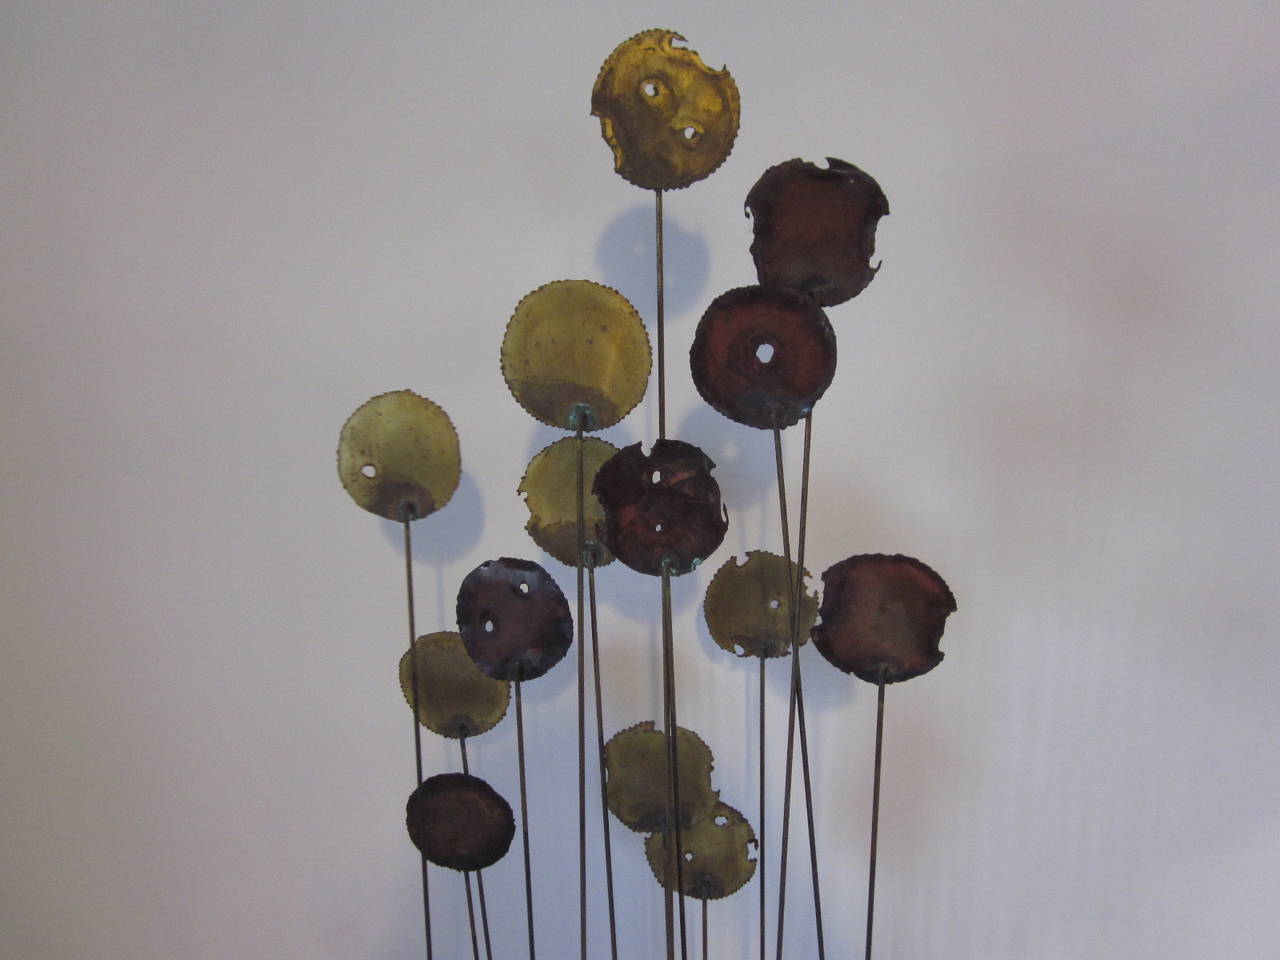 A Kinetic floor sculpture in the manner of Curtis Jere with 14 torch cut and welded medallions floating on long brass rods mounted on a metal multiple legged base.